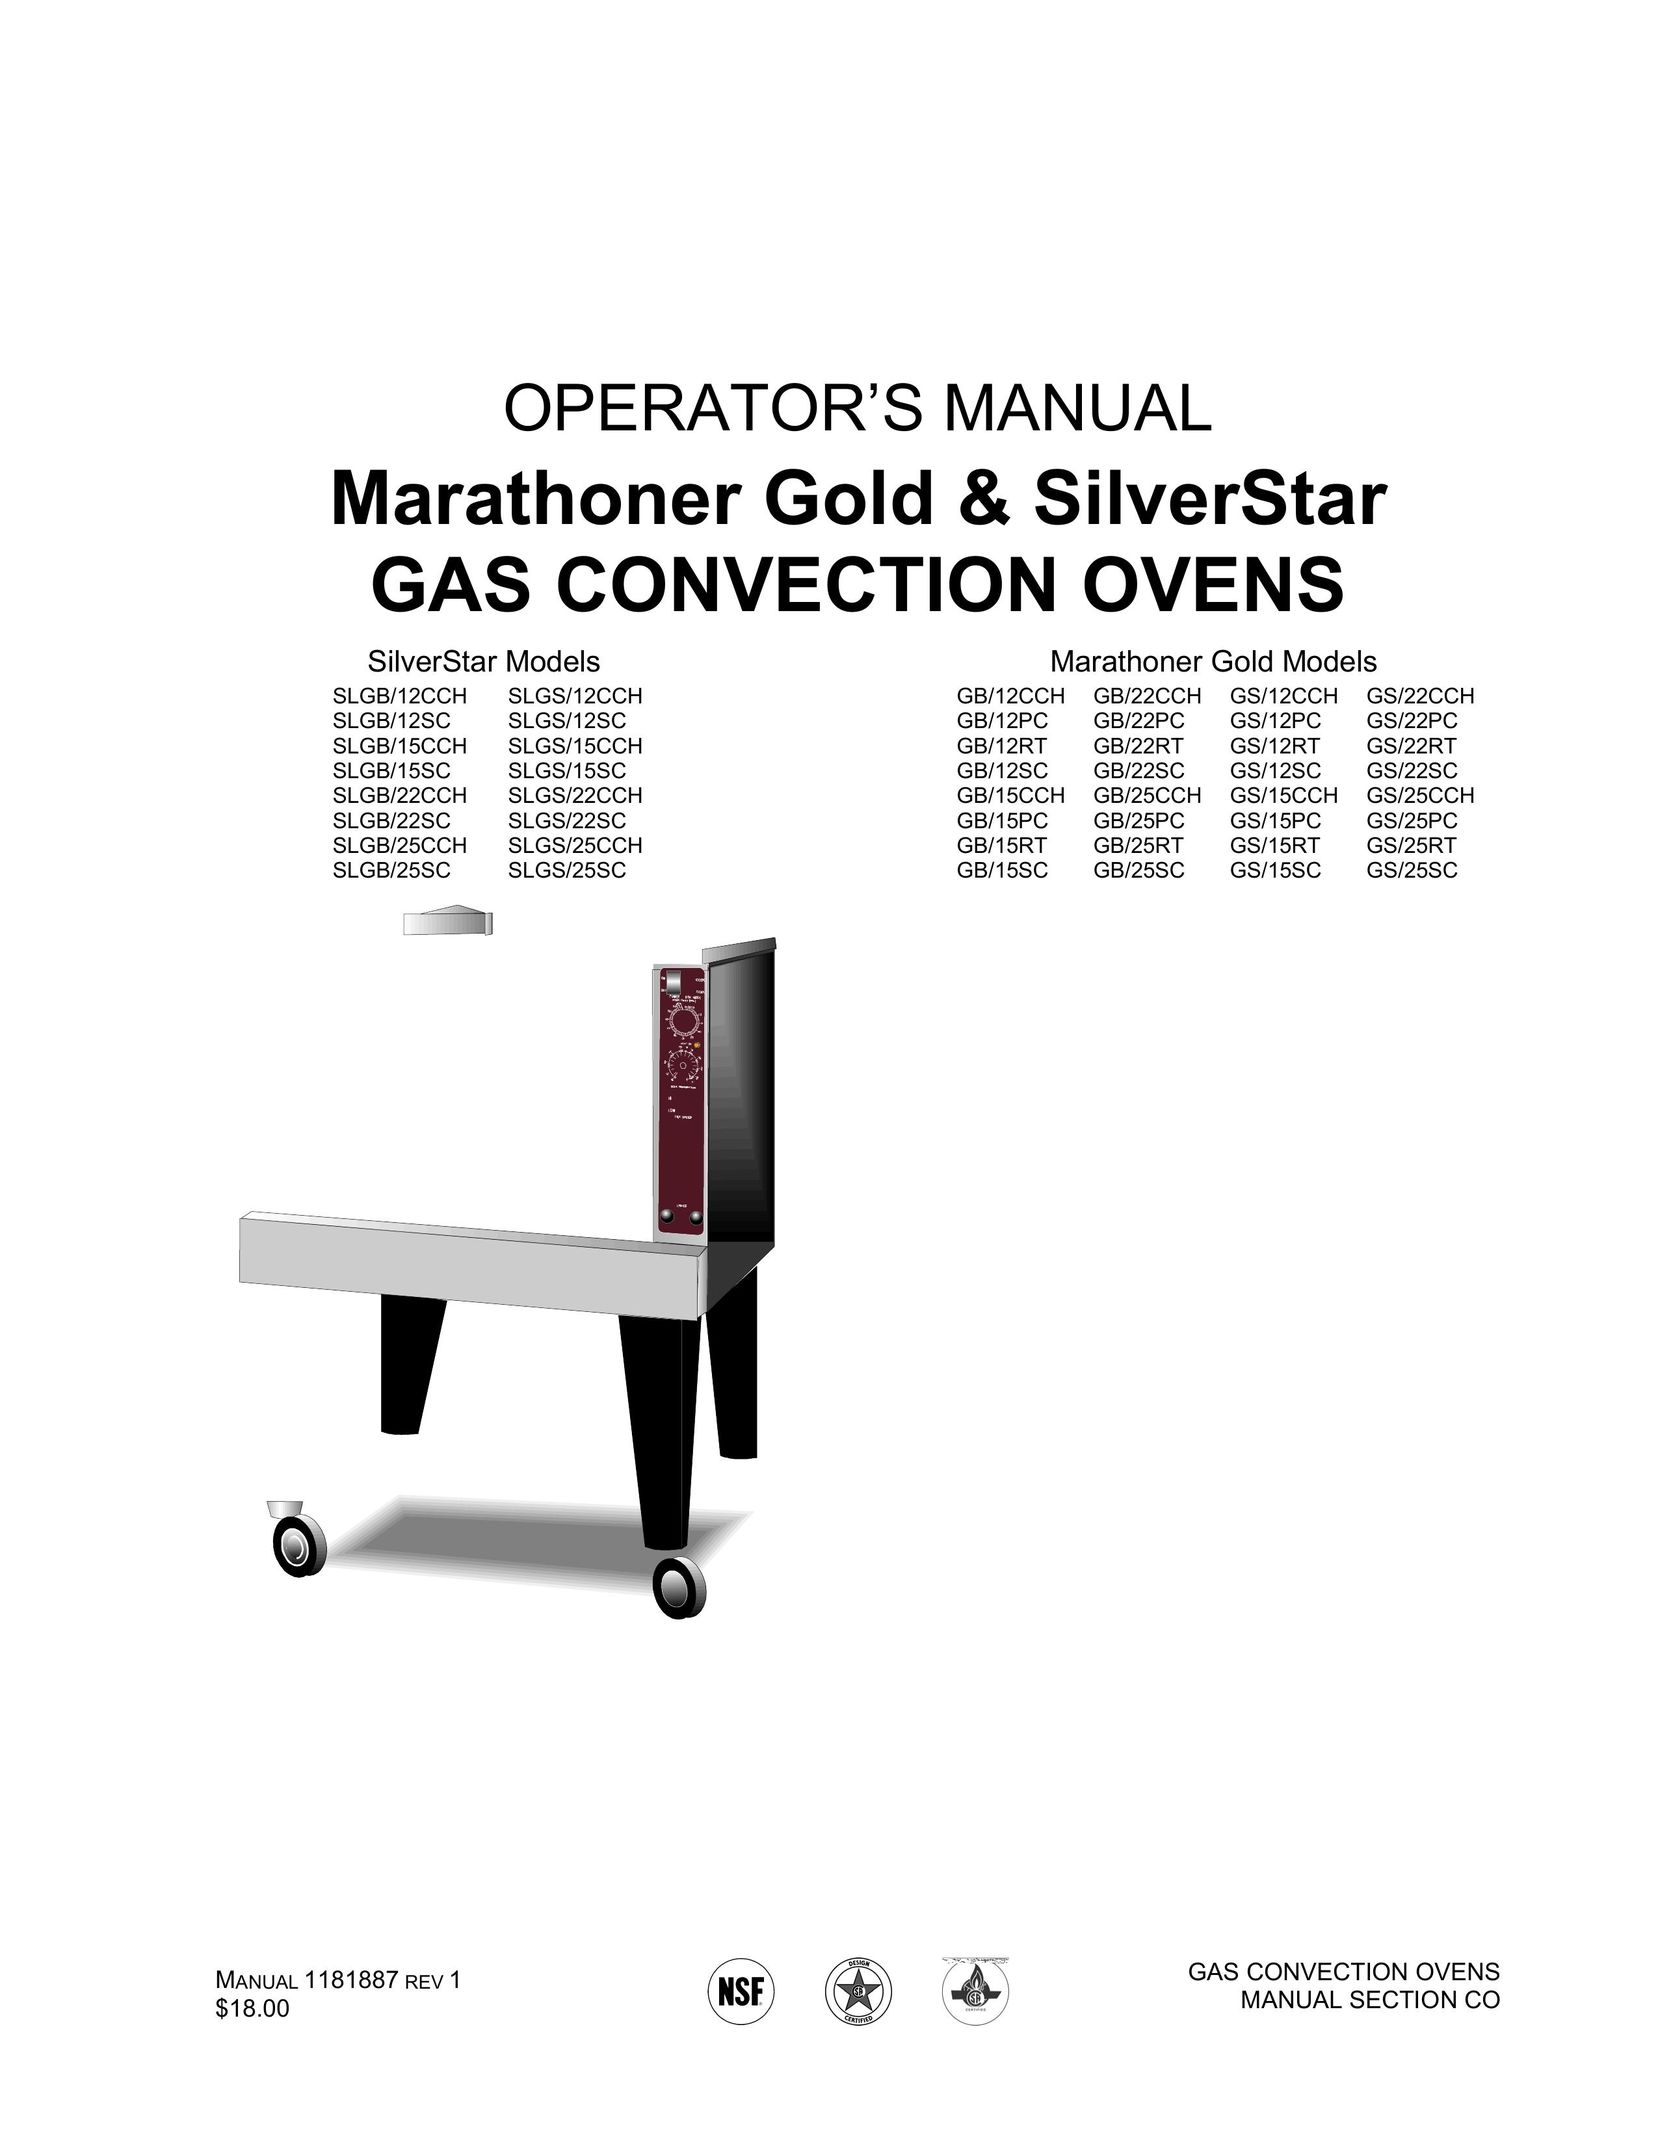 Southbend SLGS/22CCH Oven User Manual